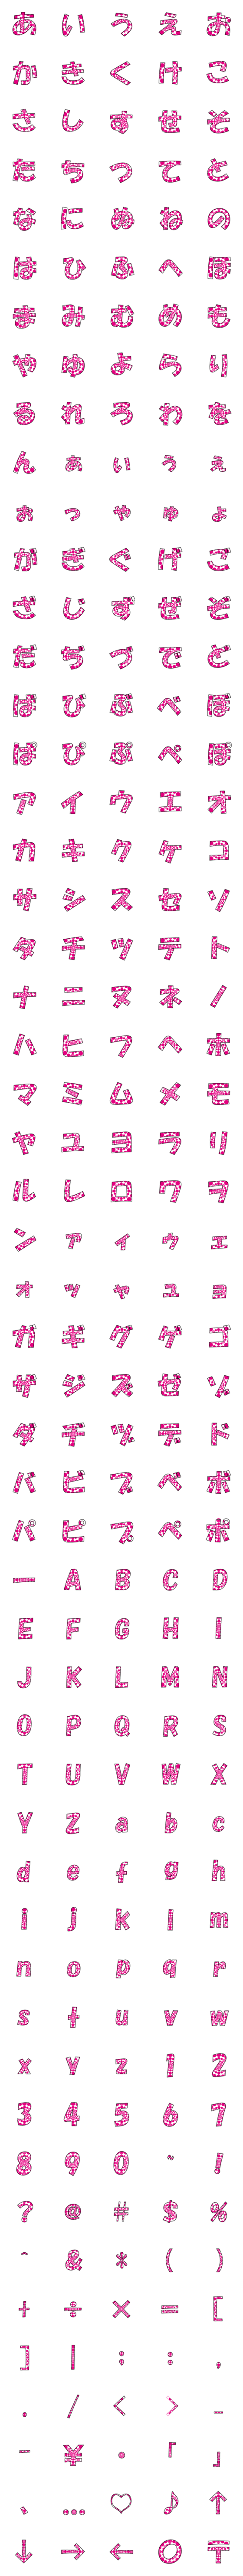 [LINE絵文字]模様文字の画像一覧